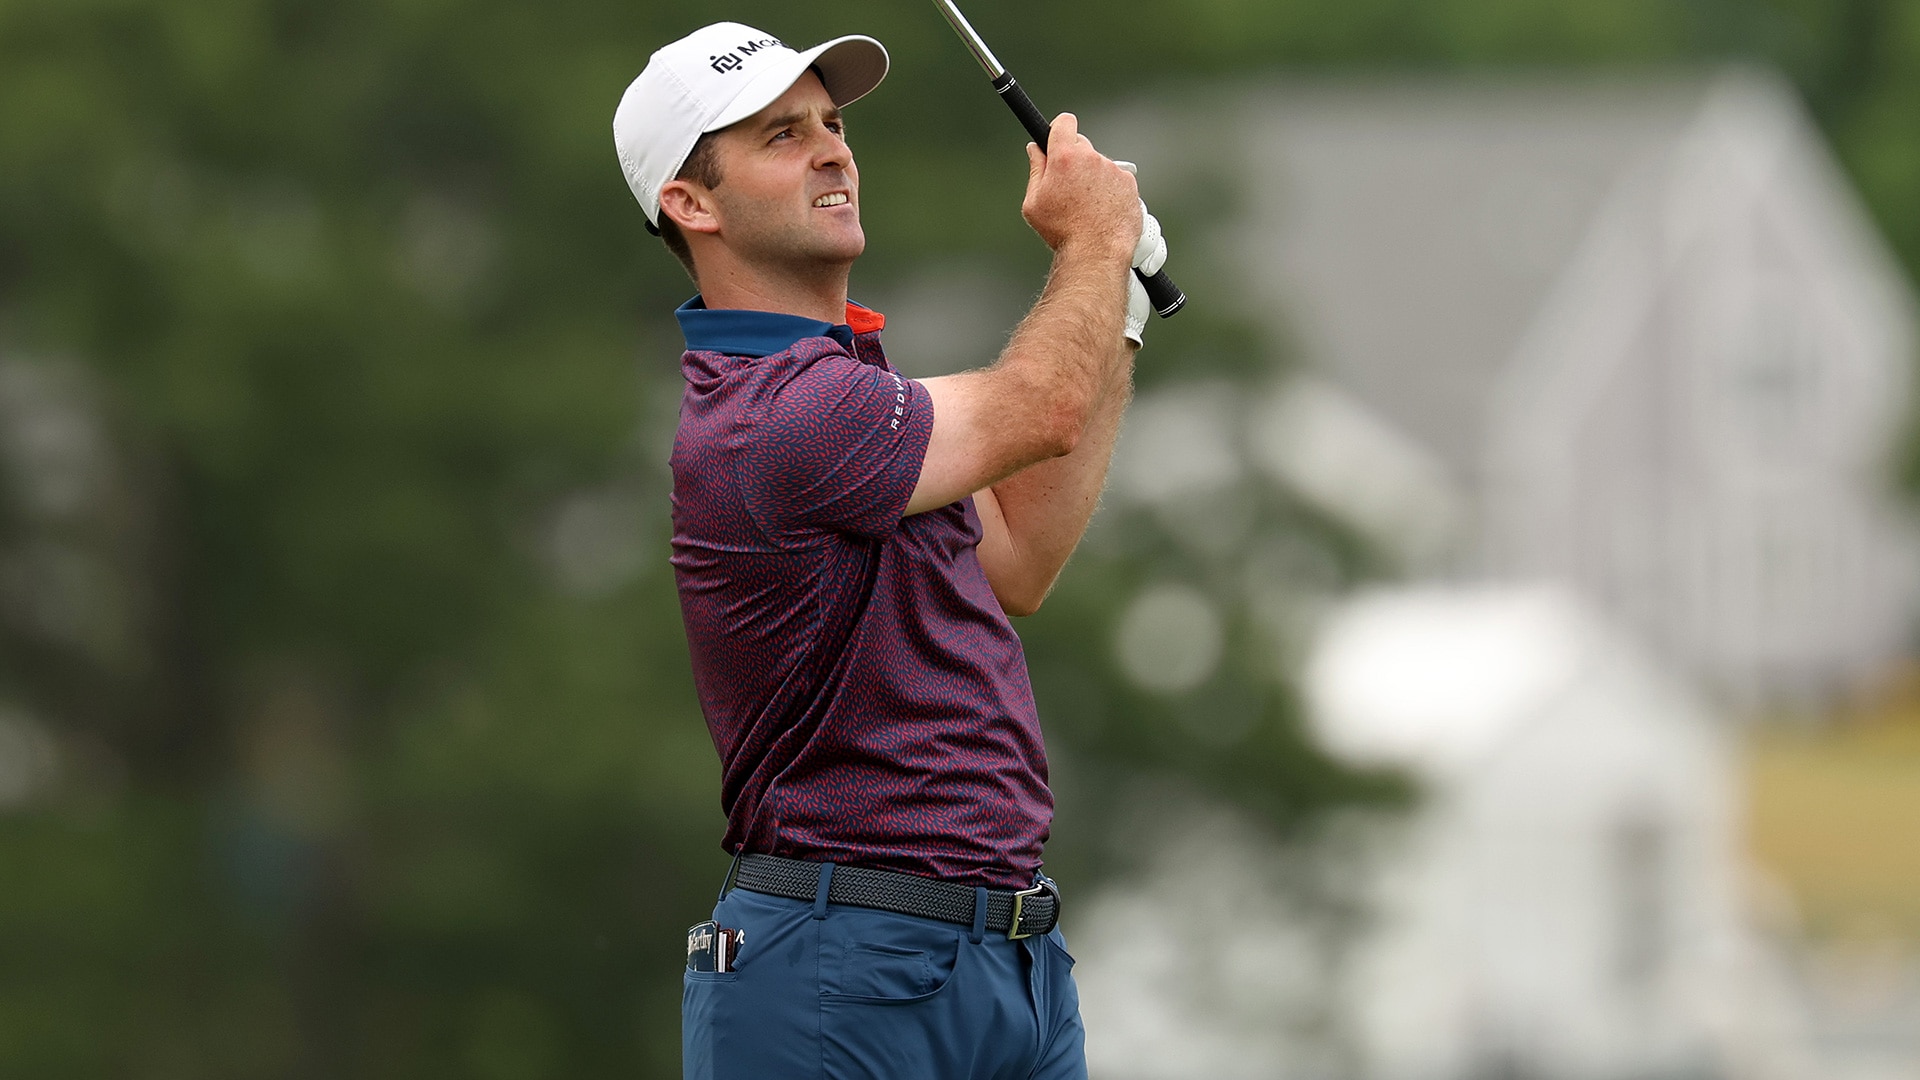 Denny McCarthy nearly holes out at last in bid for 59 at Travelers Championship